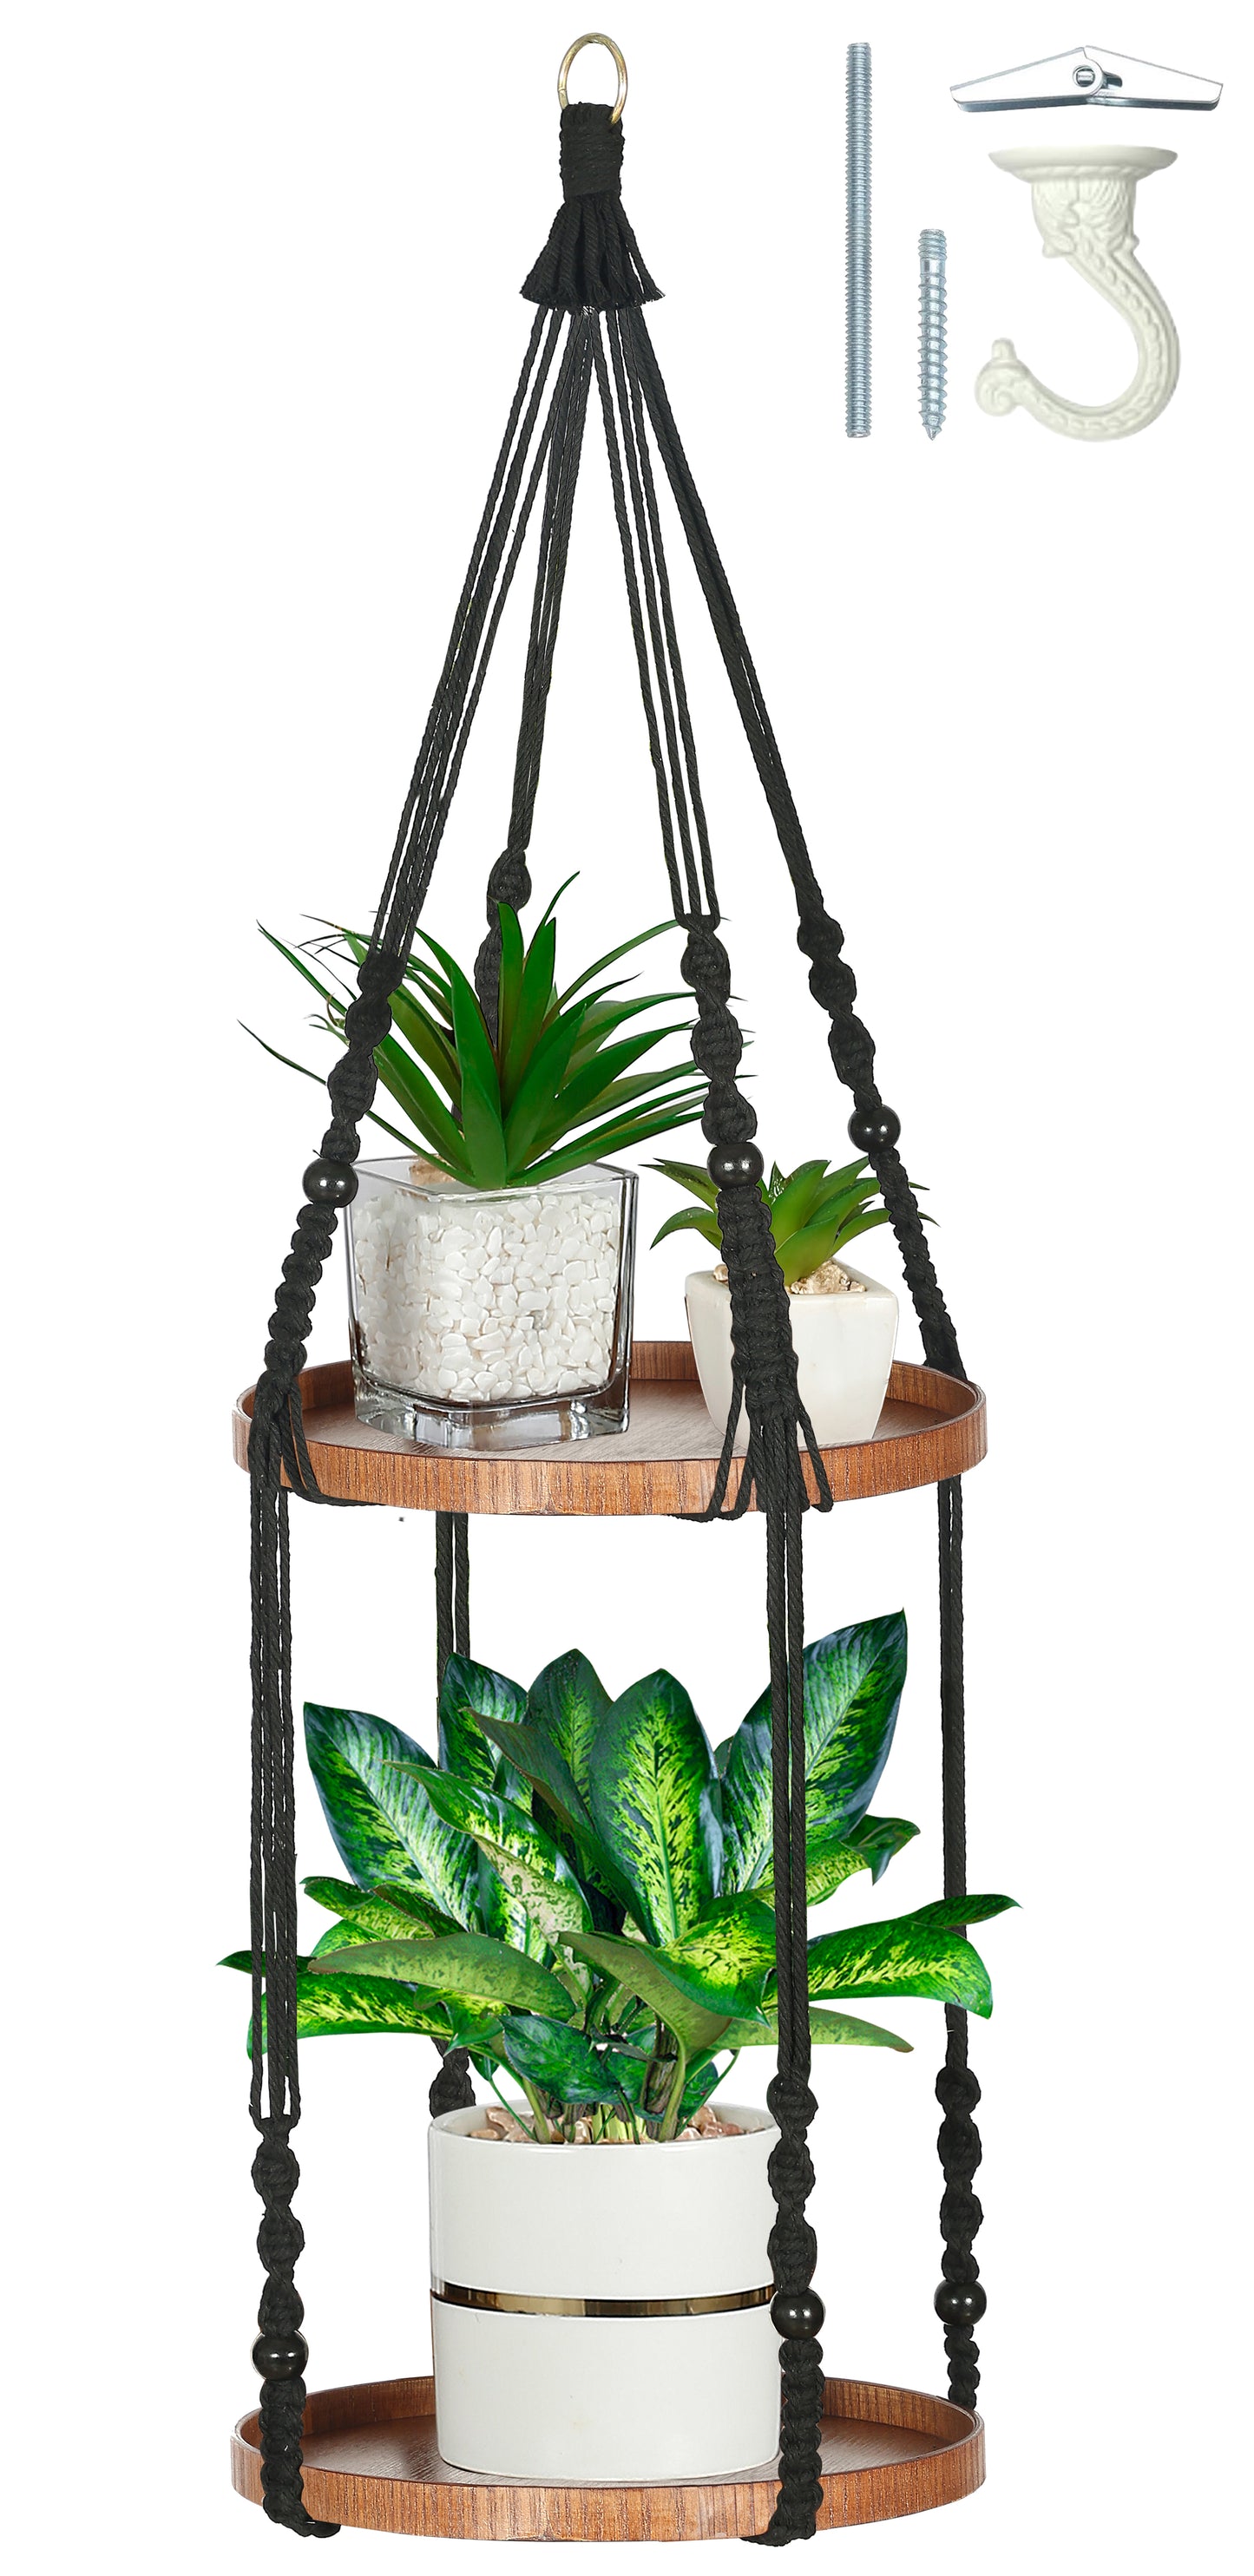 2 Tier Macrame Cotton Plant Hanger with Wooden Tray